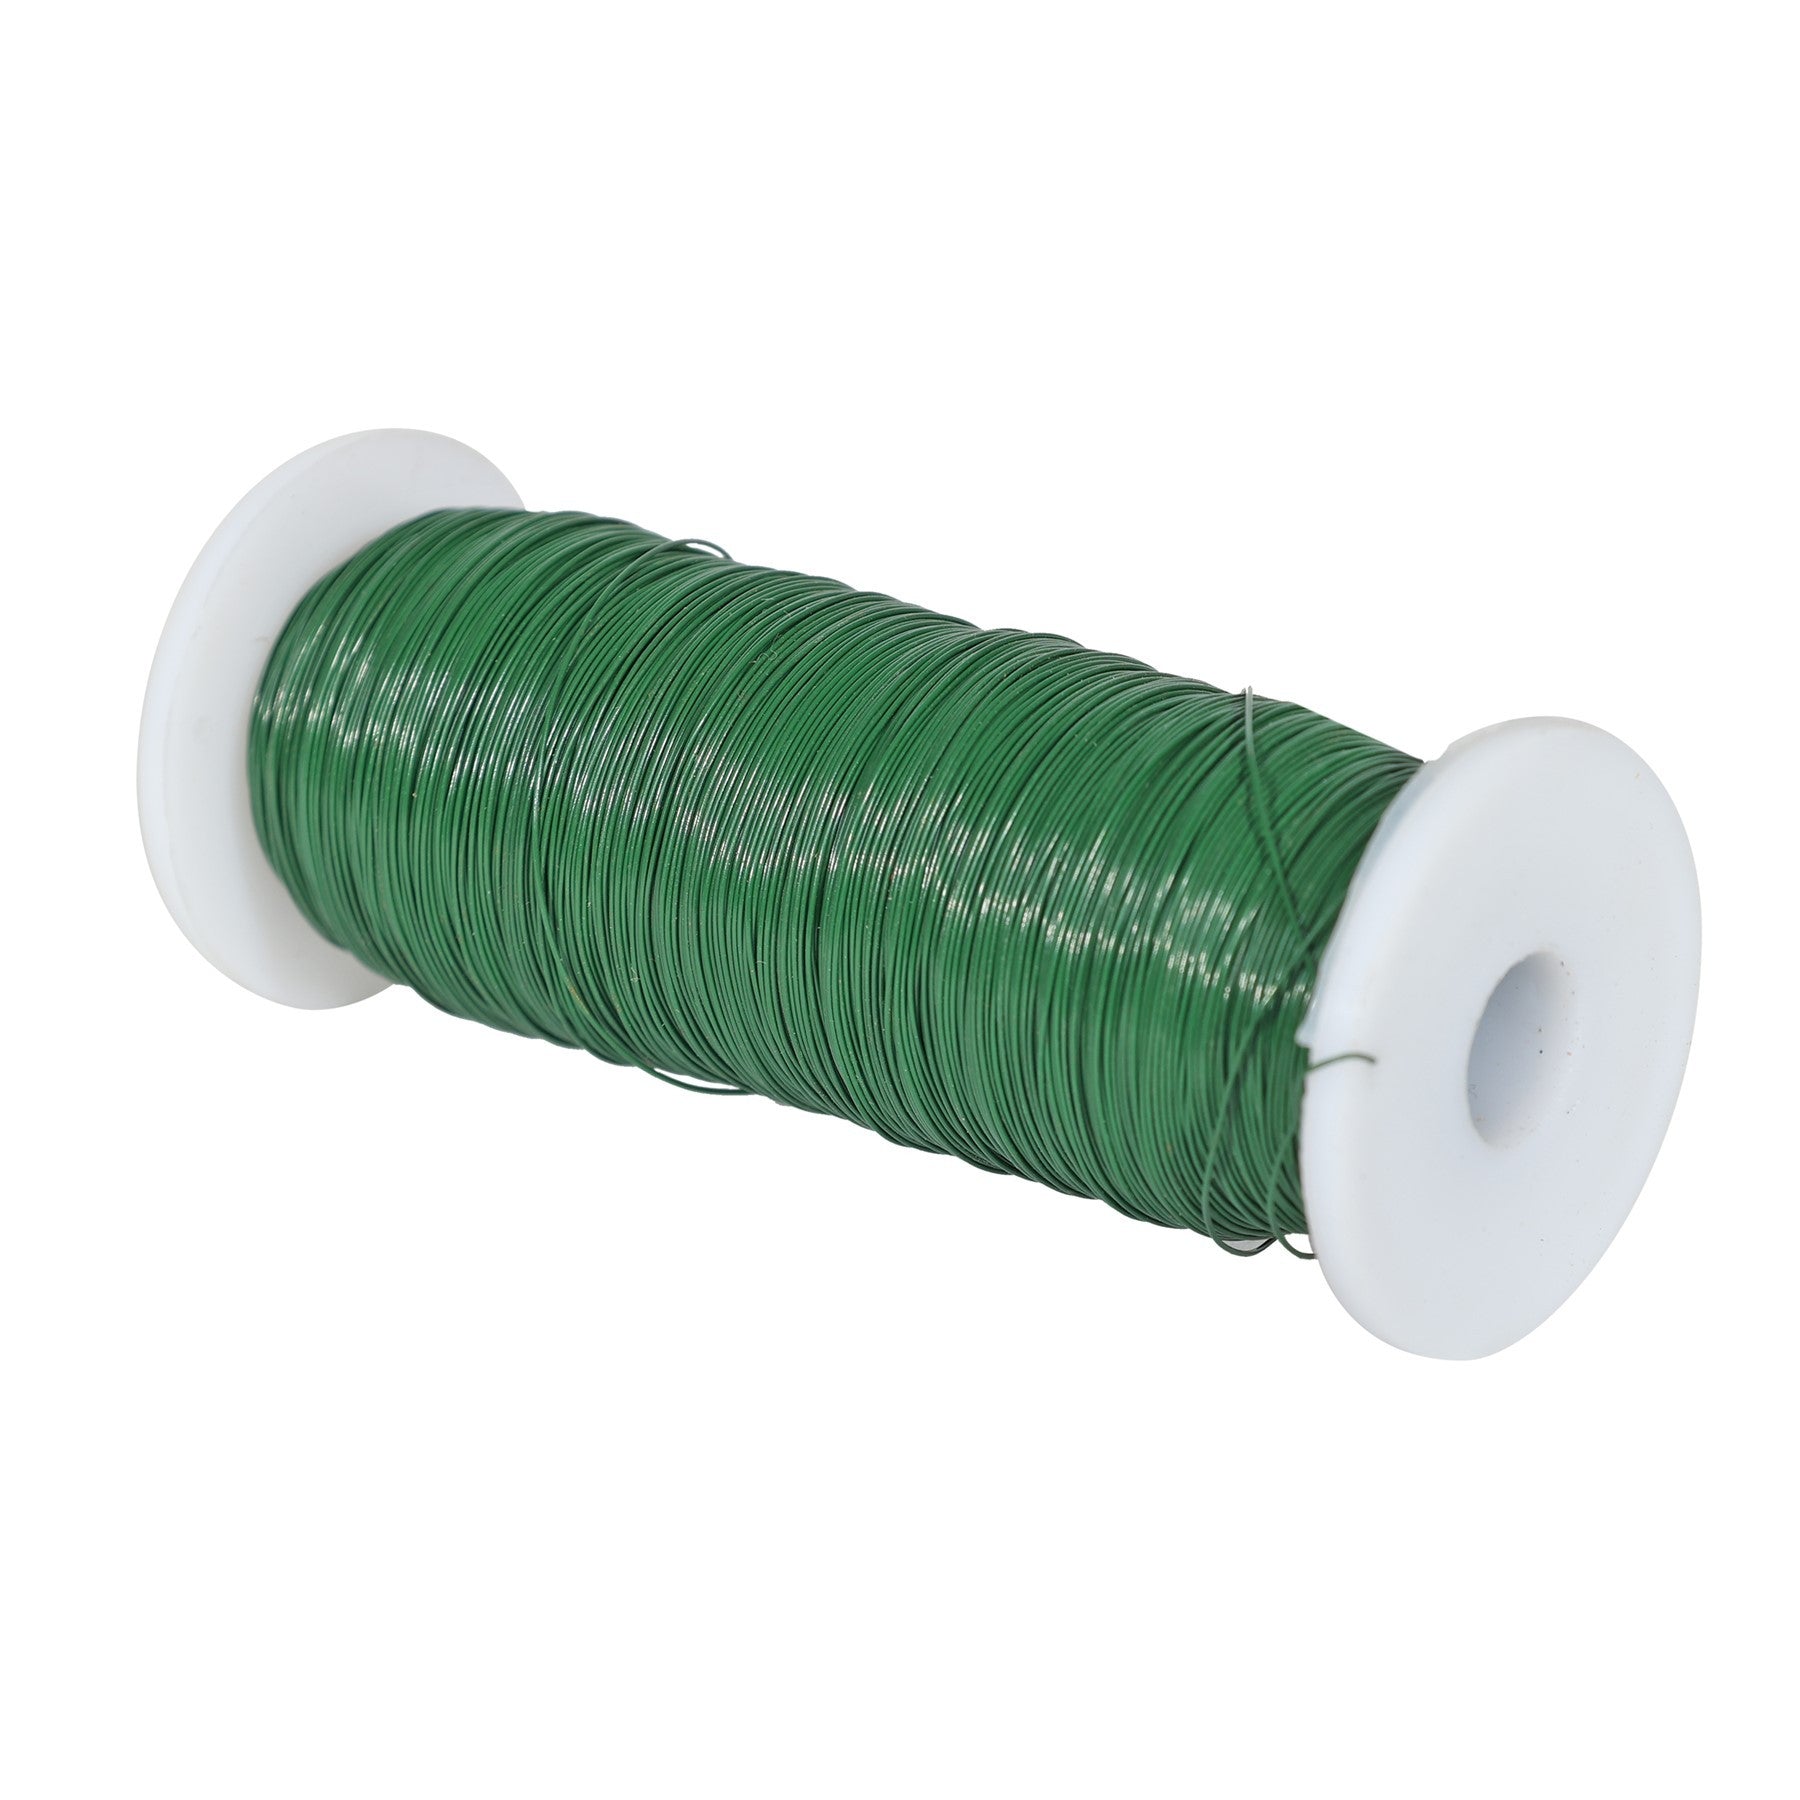 View Green Wire 32g Reel information